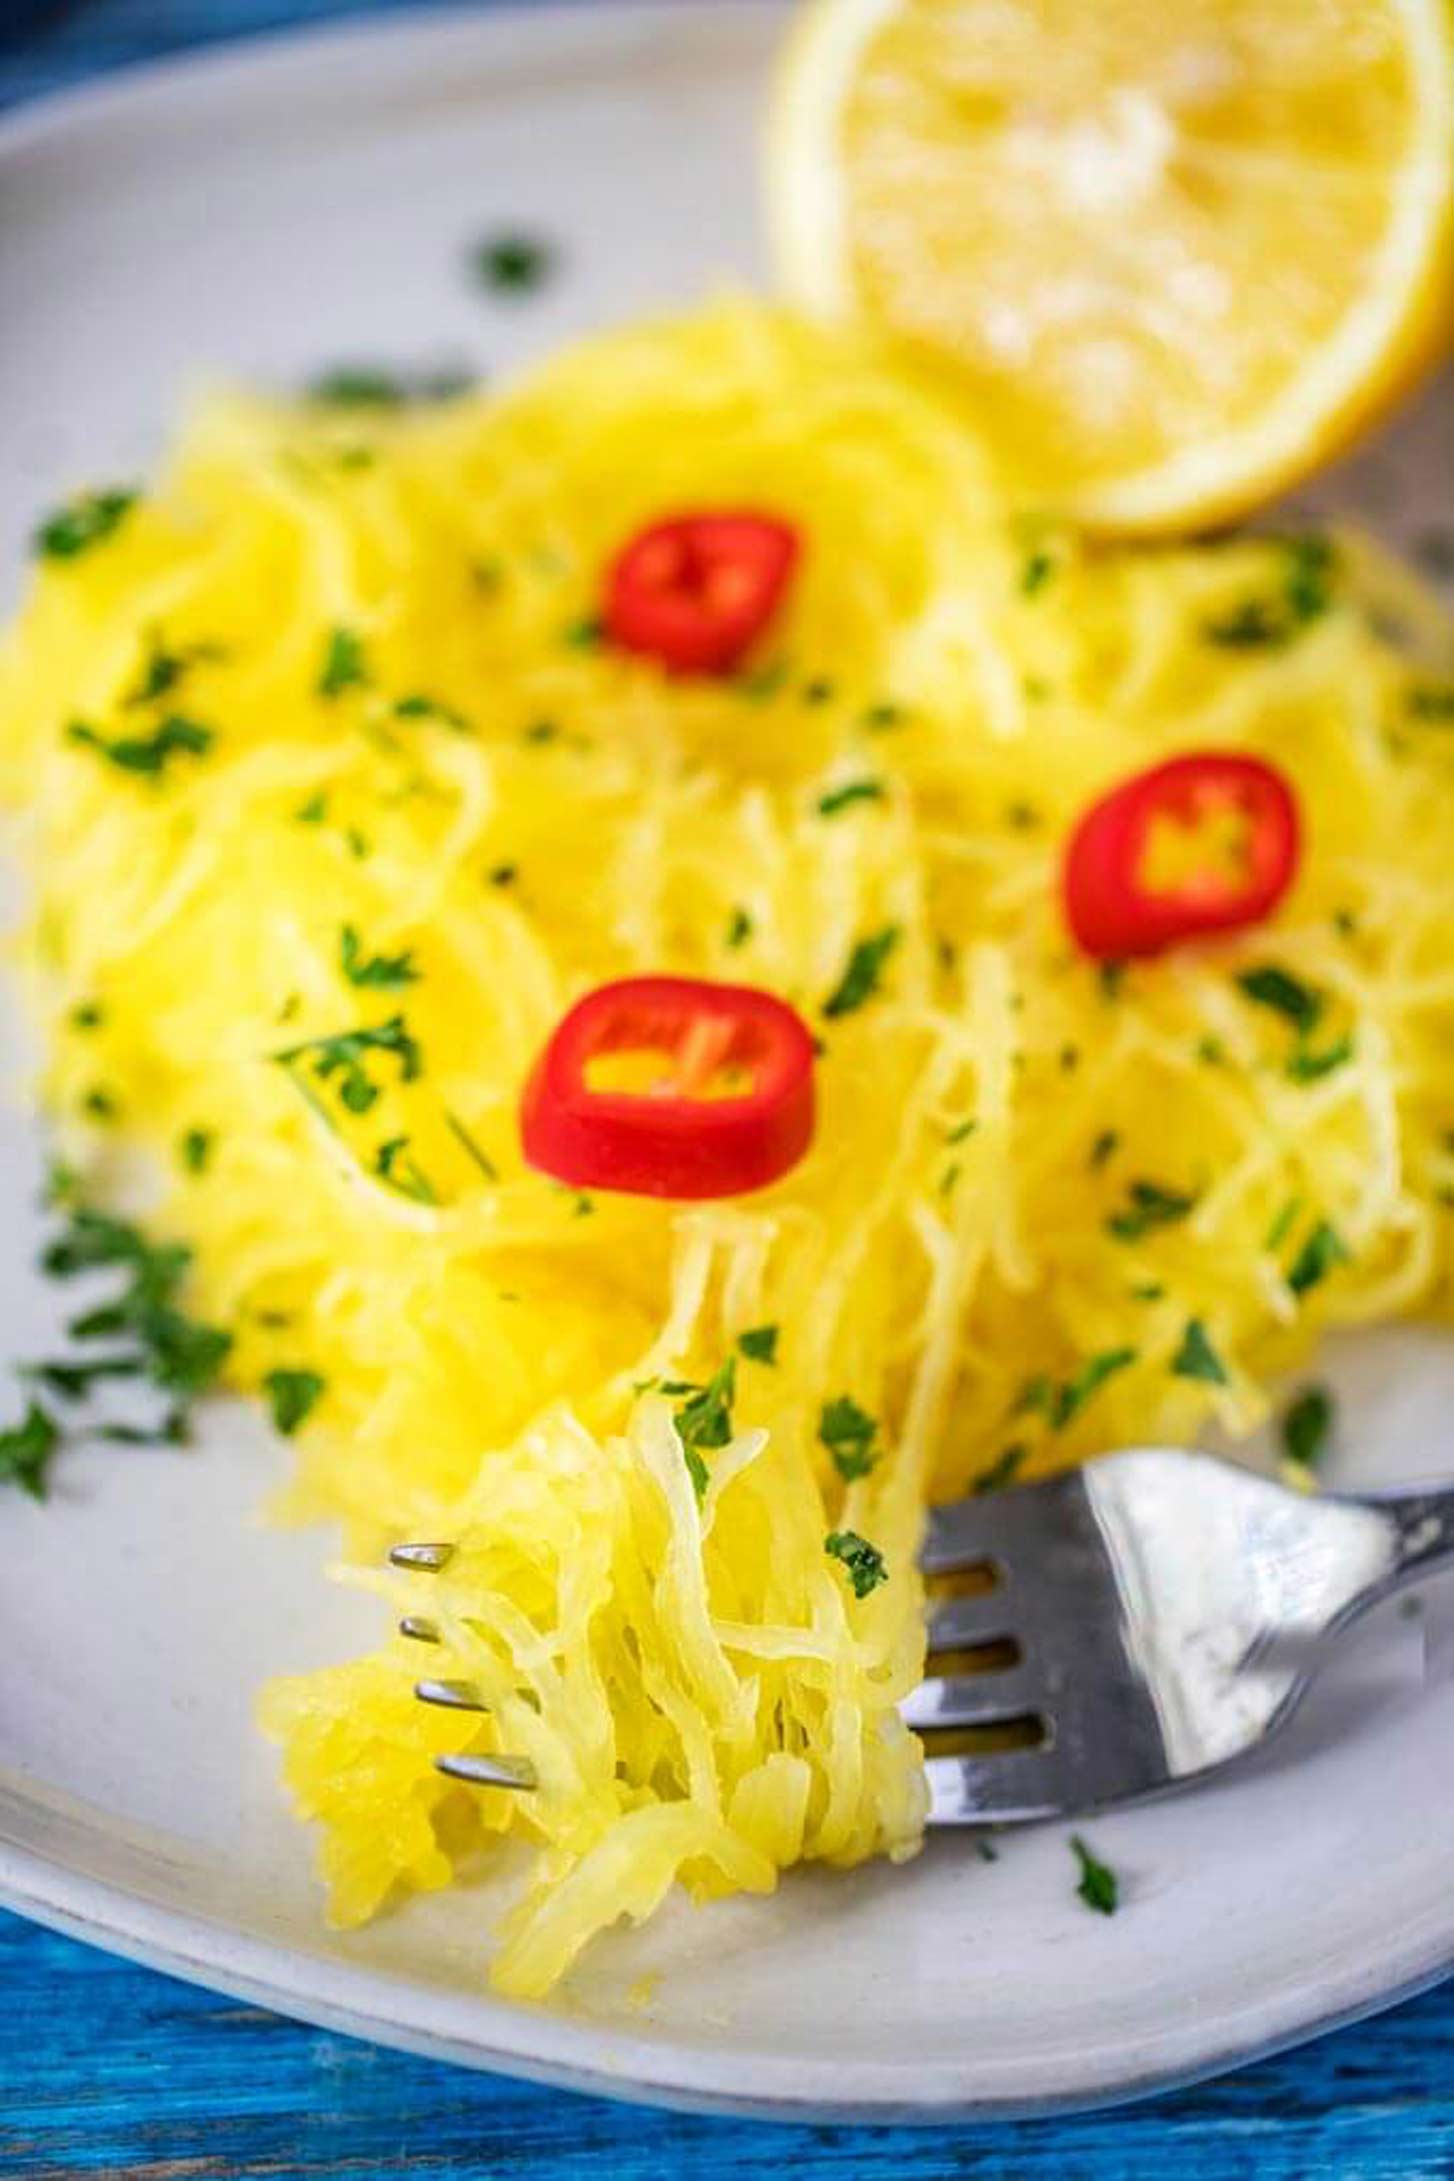 Close up photo of Instant Pot Spaghetti Squash on a fork, garnished with hot peppers and parsley with a lemon.